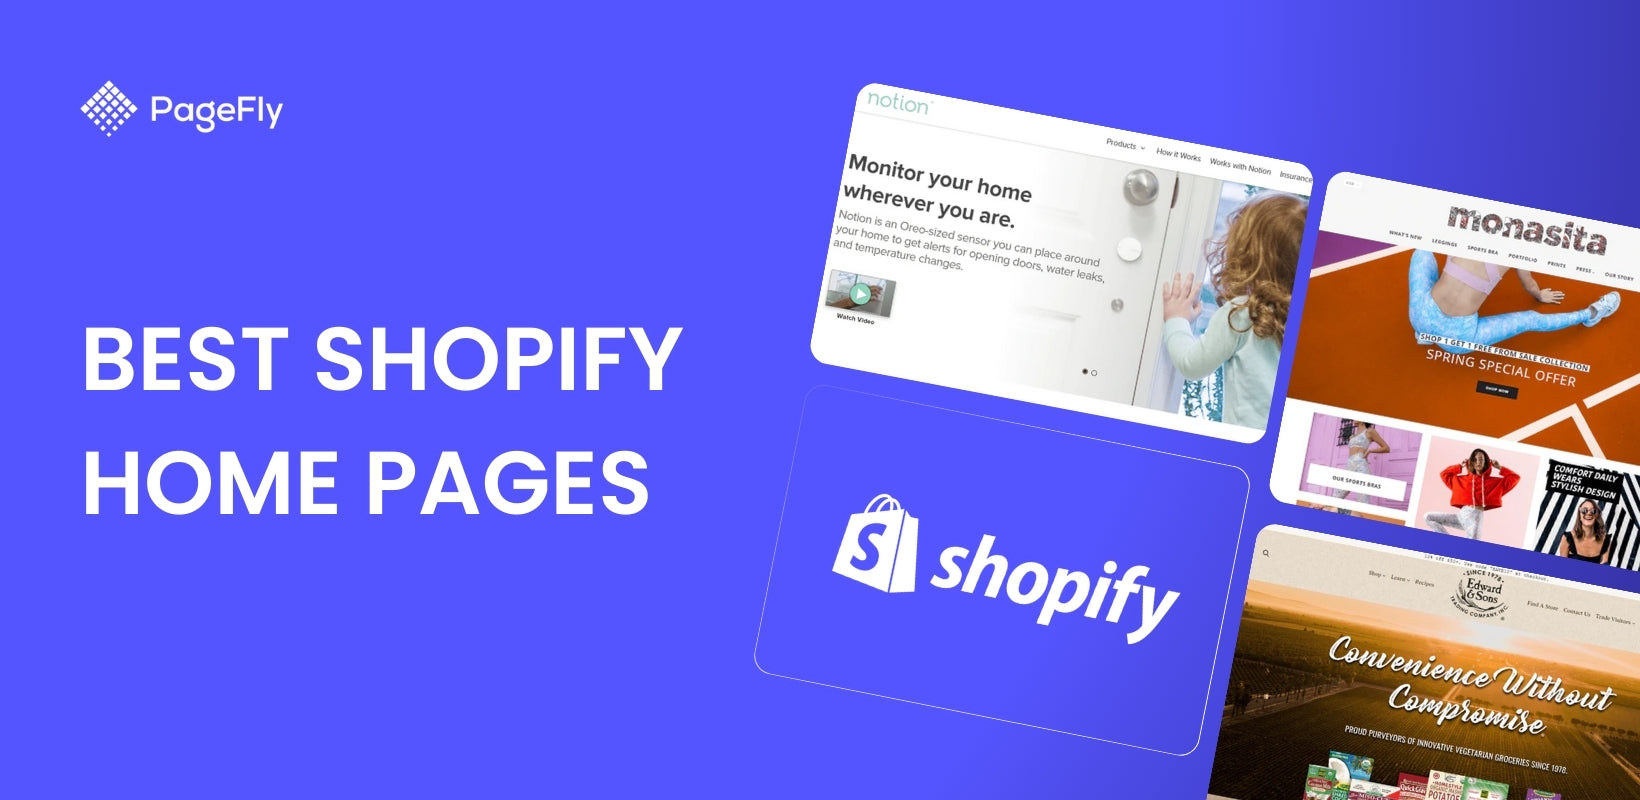 10 Best Shopify Home Pages Using PageFly Templates